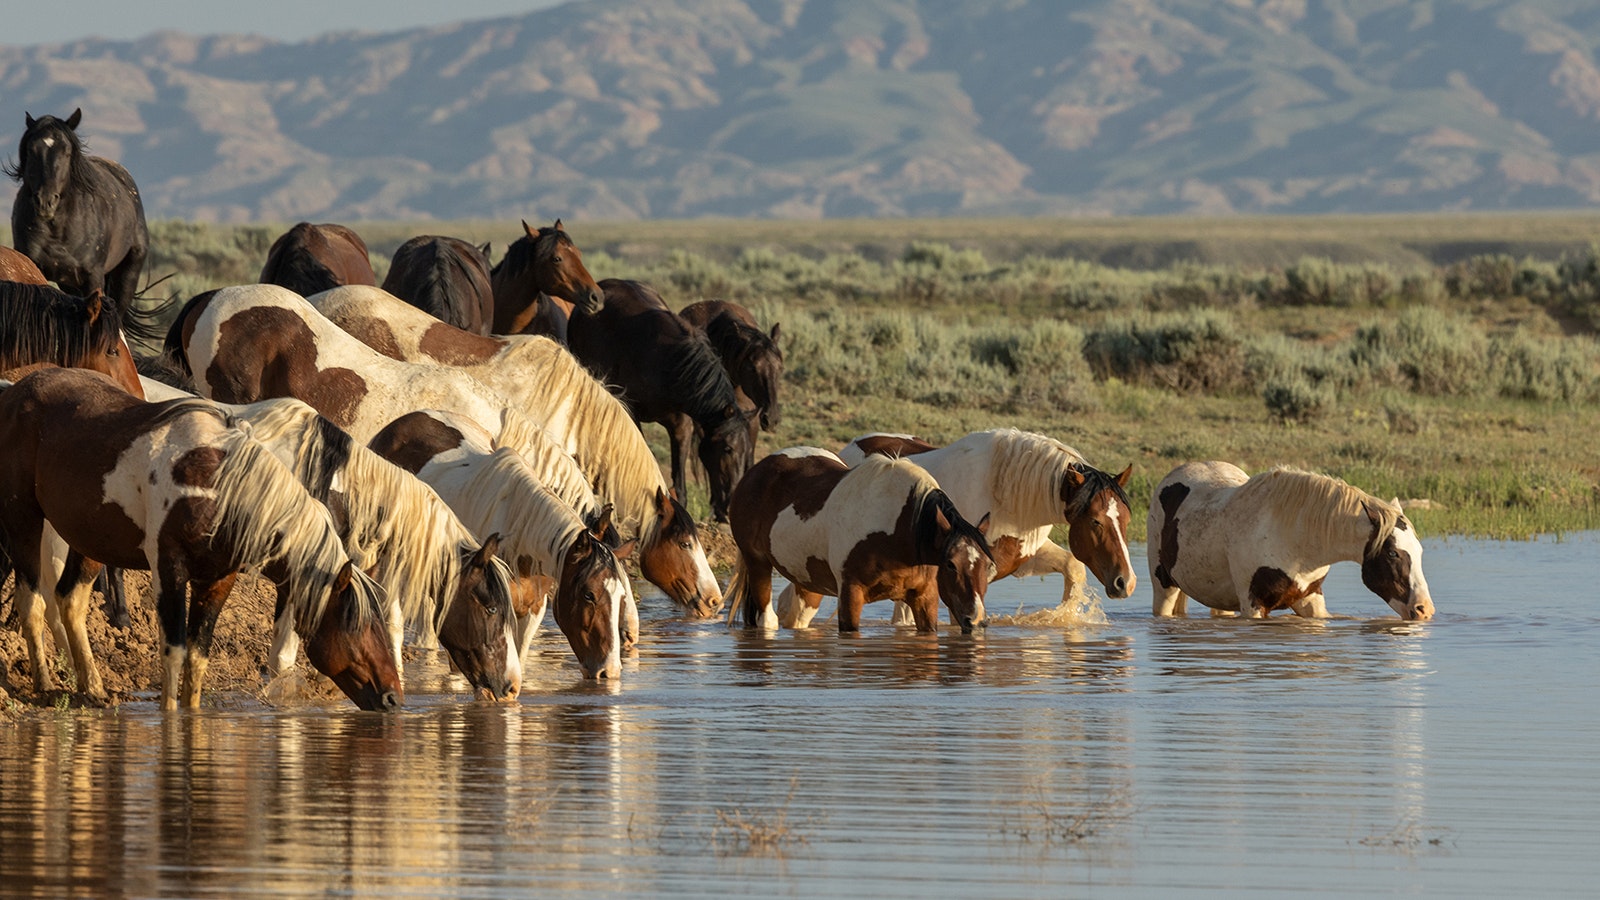 Heavy snows last winter, combined with rain over the spring and summer, have provided the McCullough Peaks mustang herd near Cody with ample forage and water.